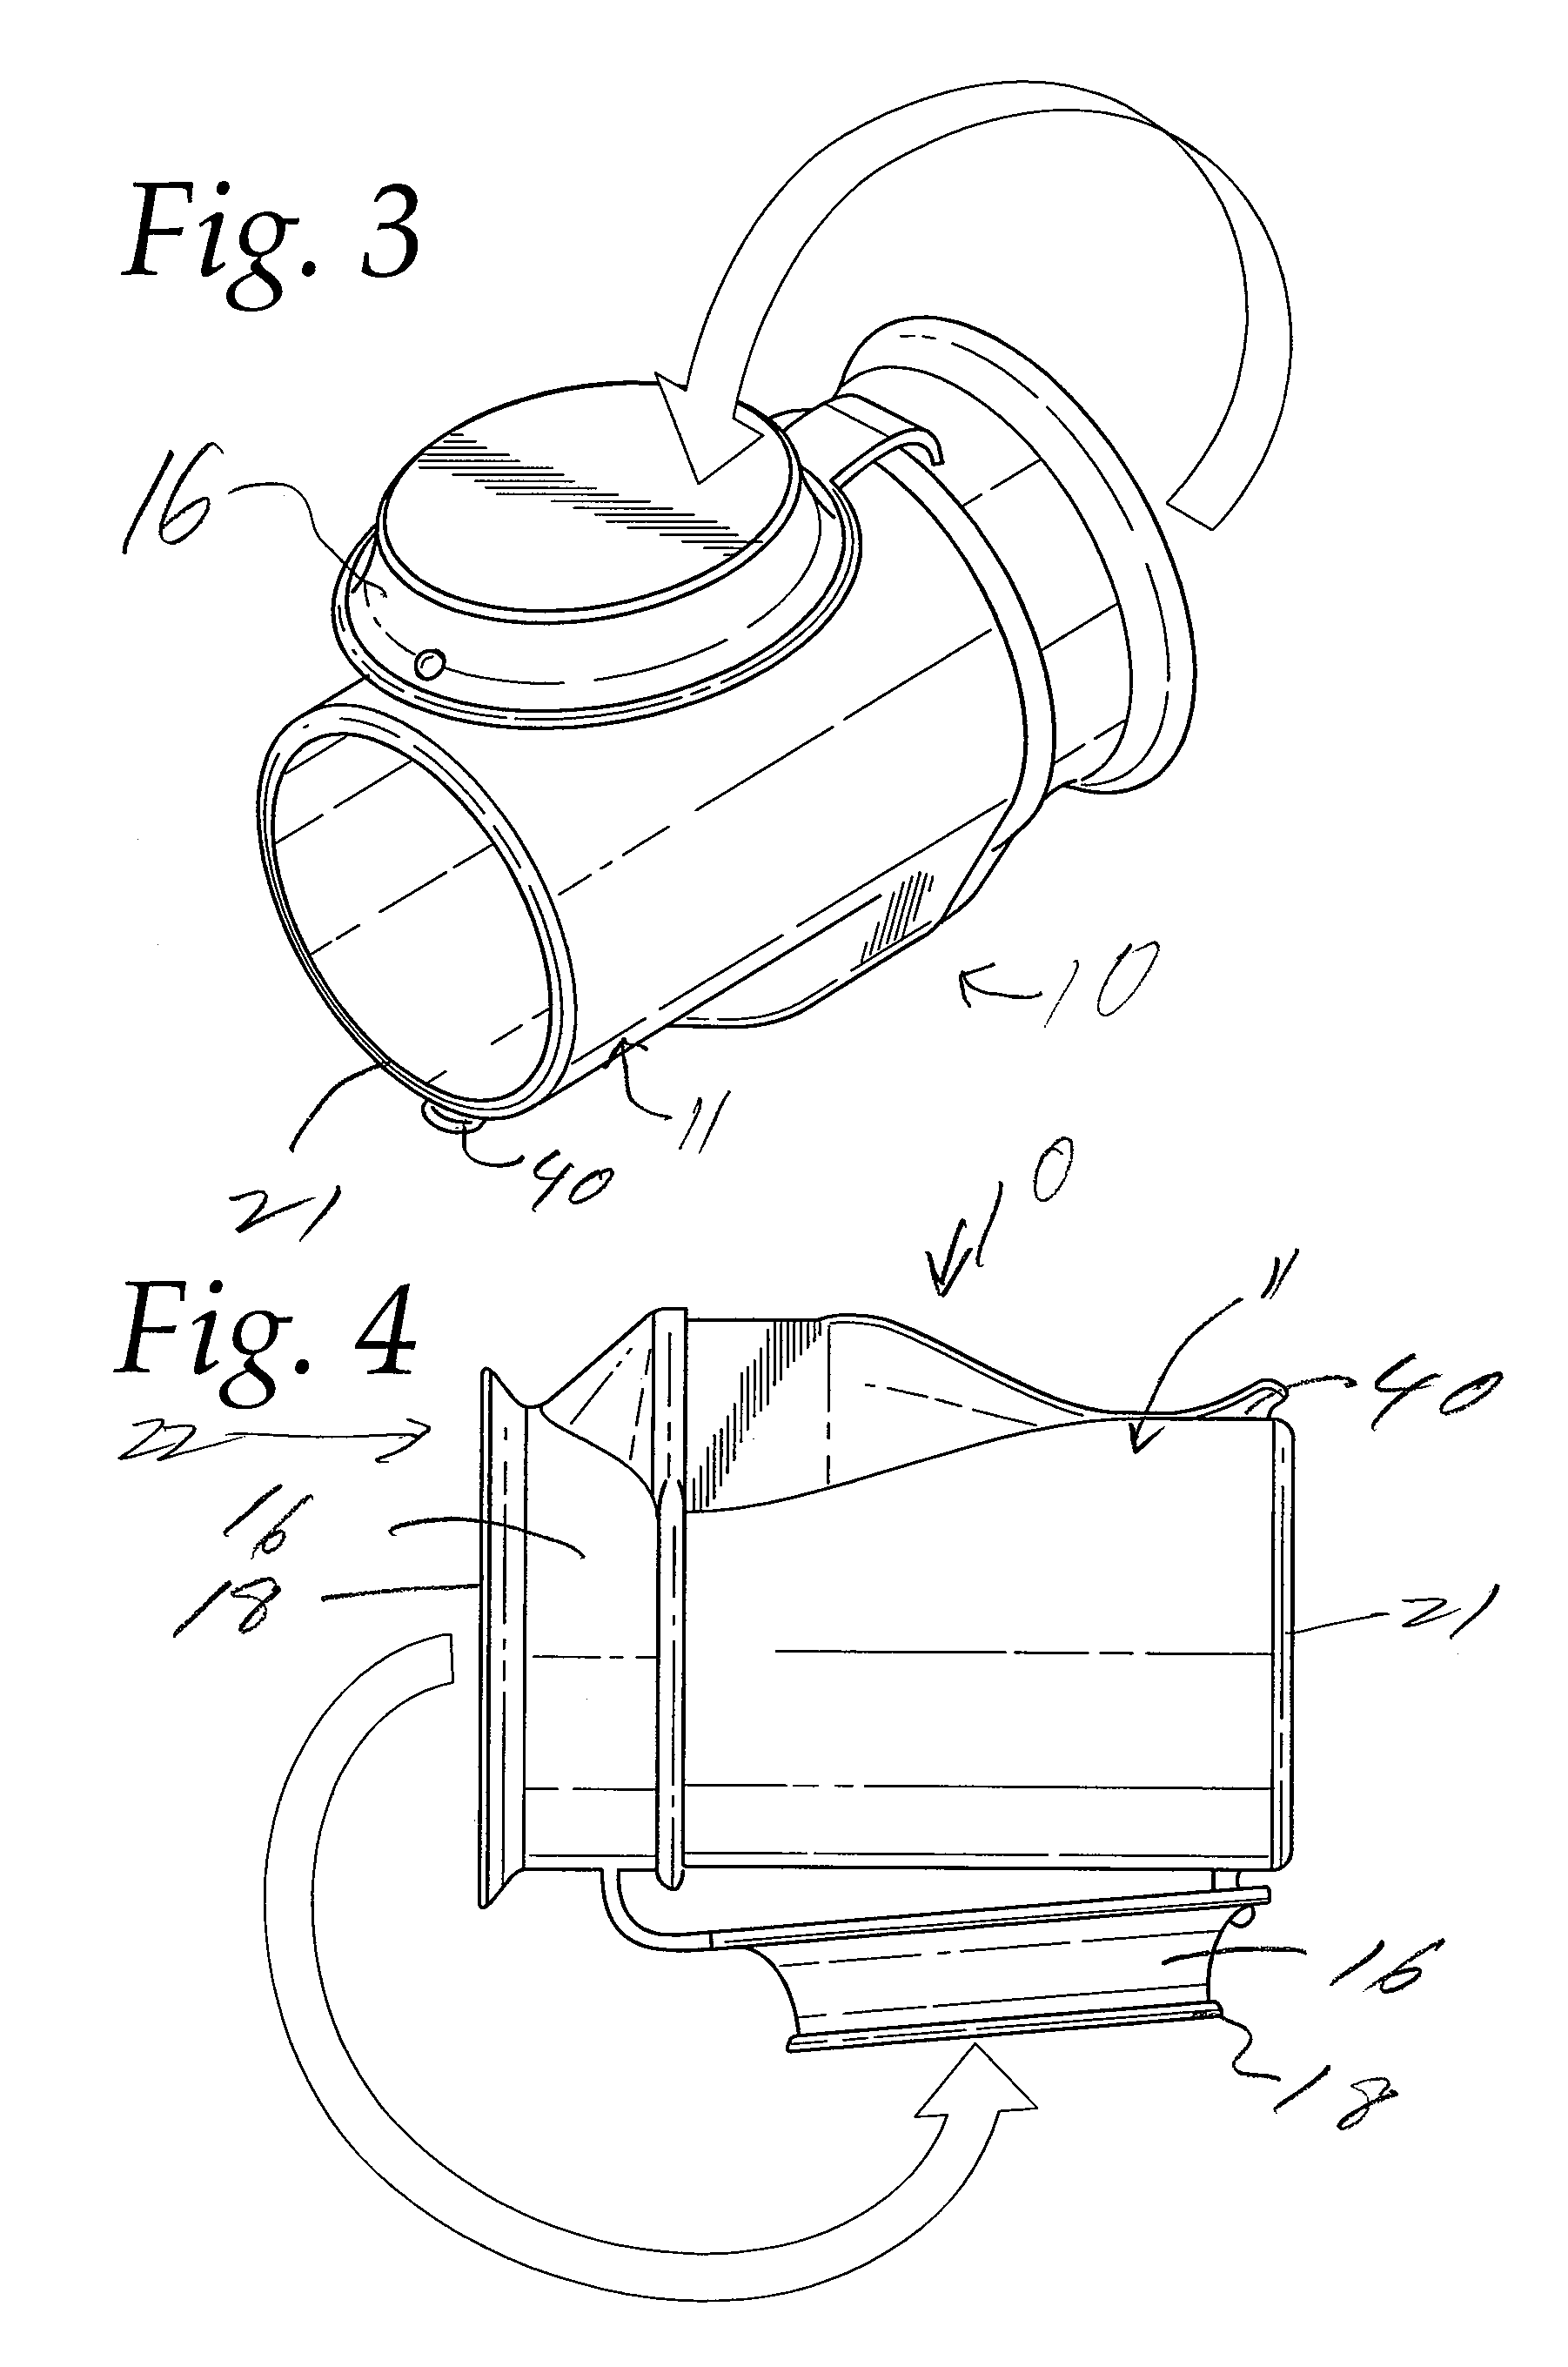 Eye cup night filter attachment and mounting device